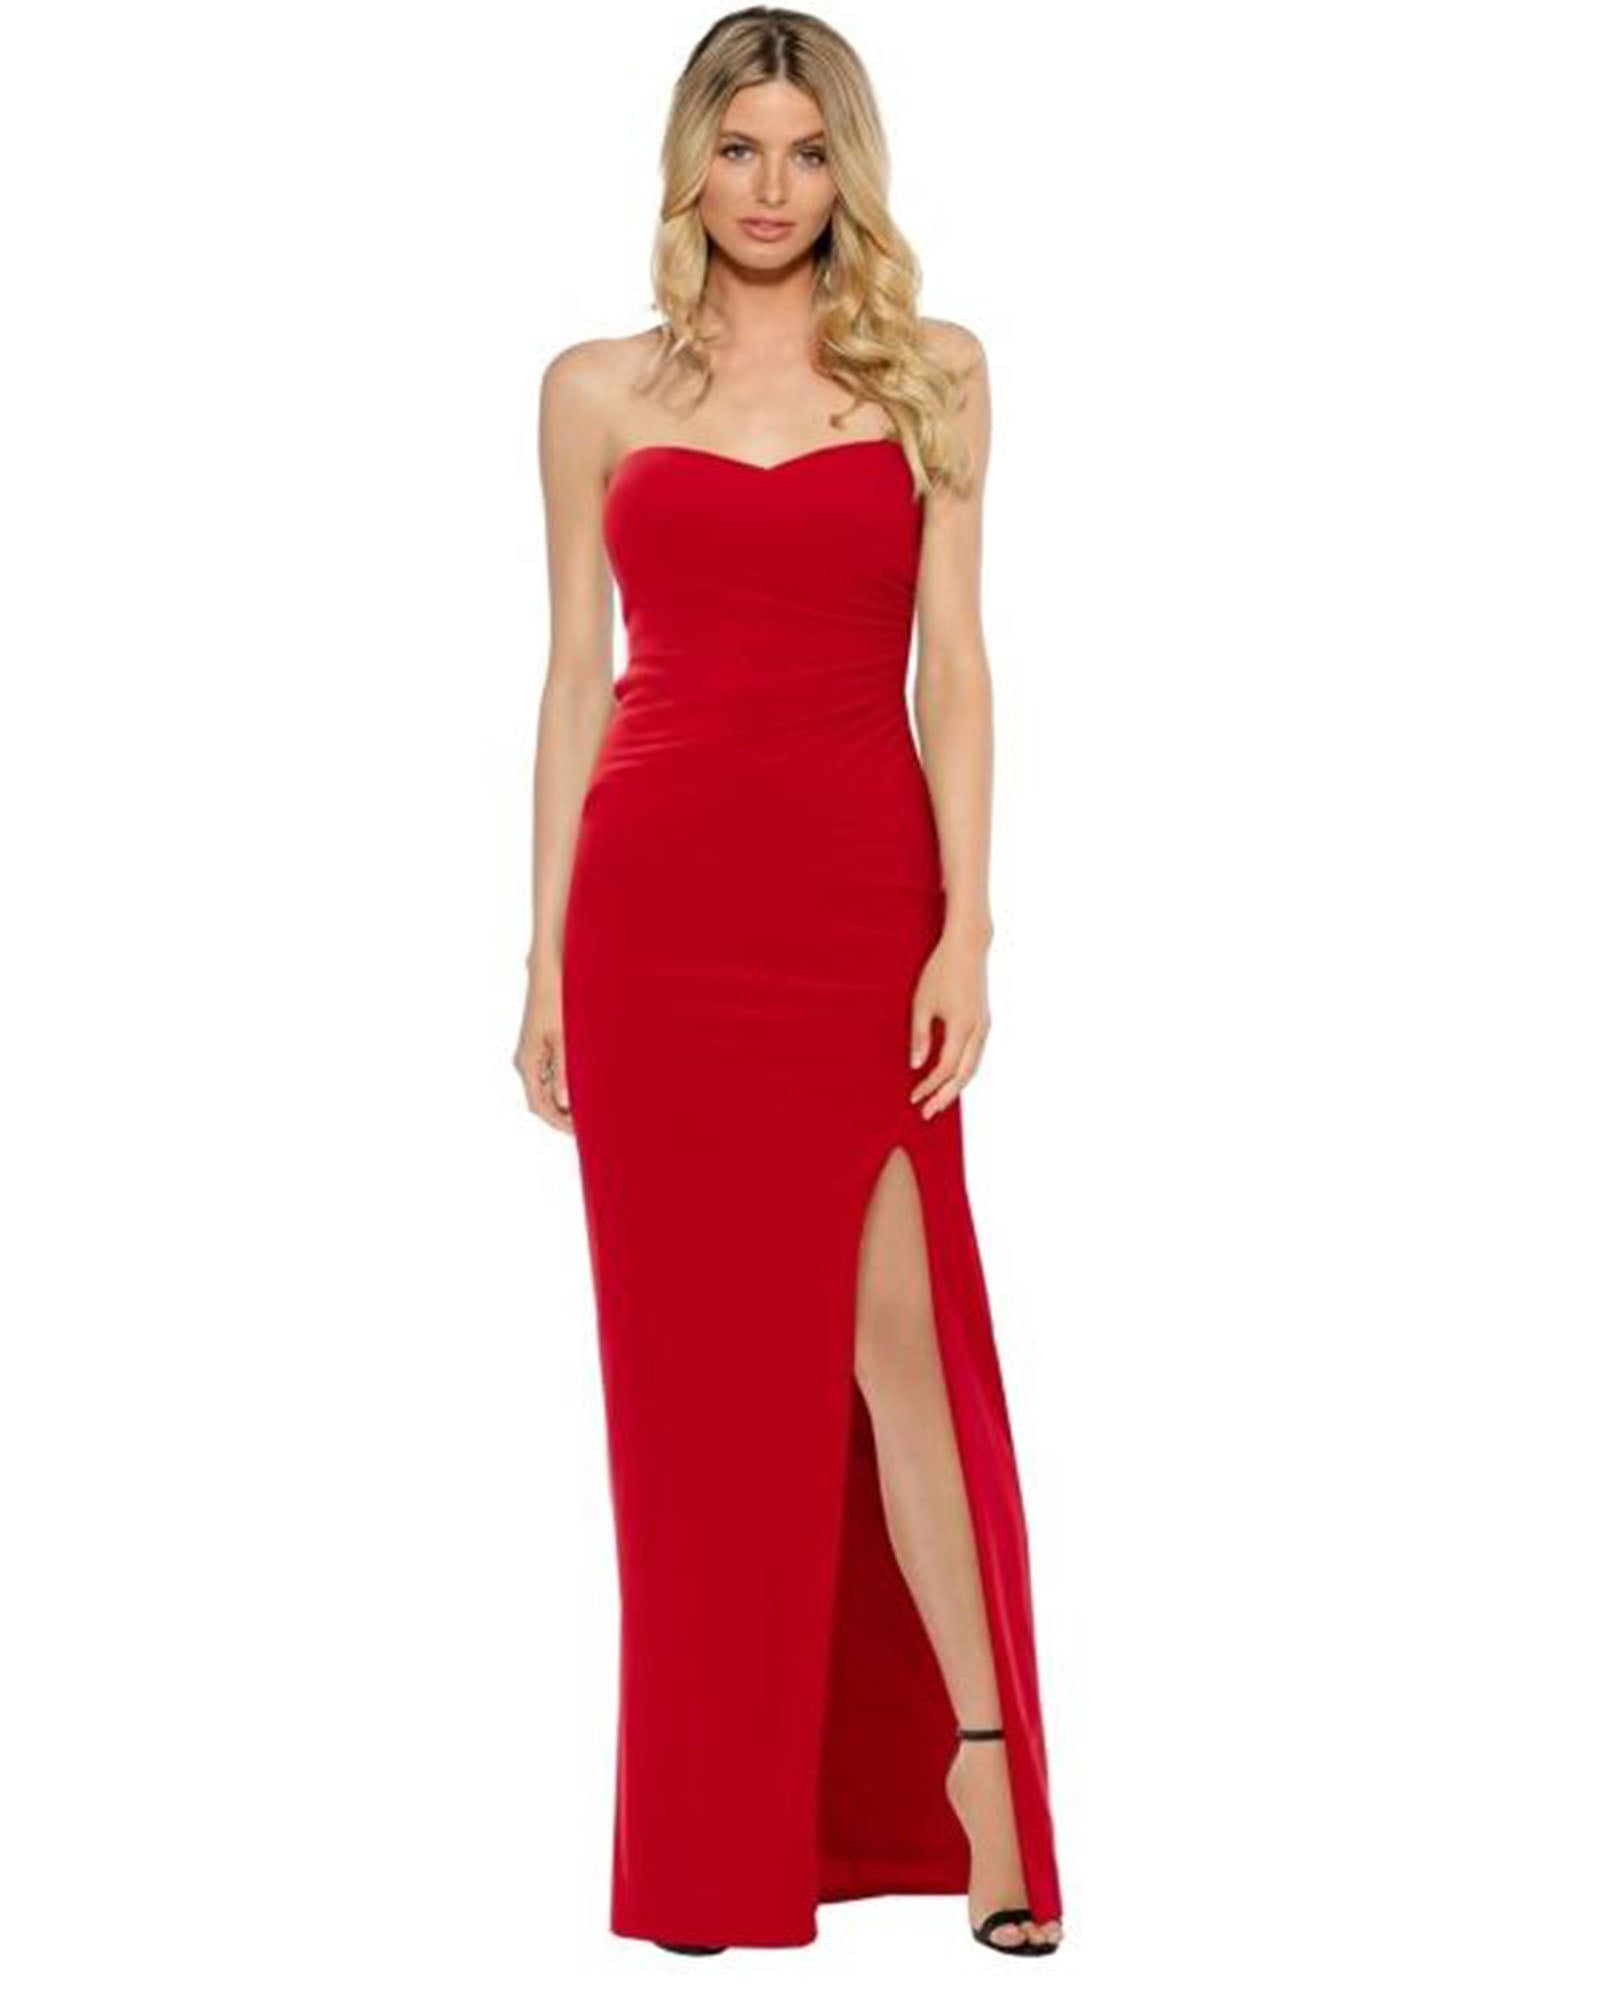 SKIVA strapless evening dress long red split gown open back sheath stretch fabric